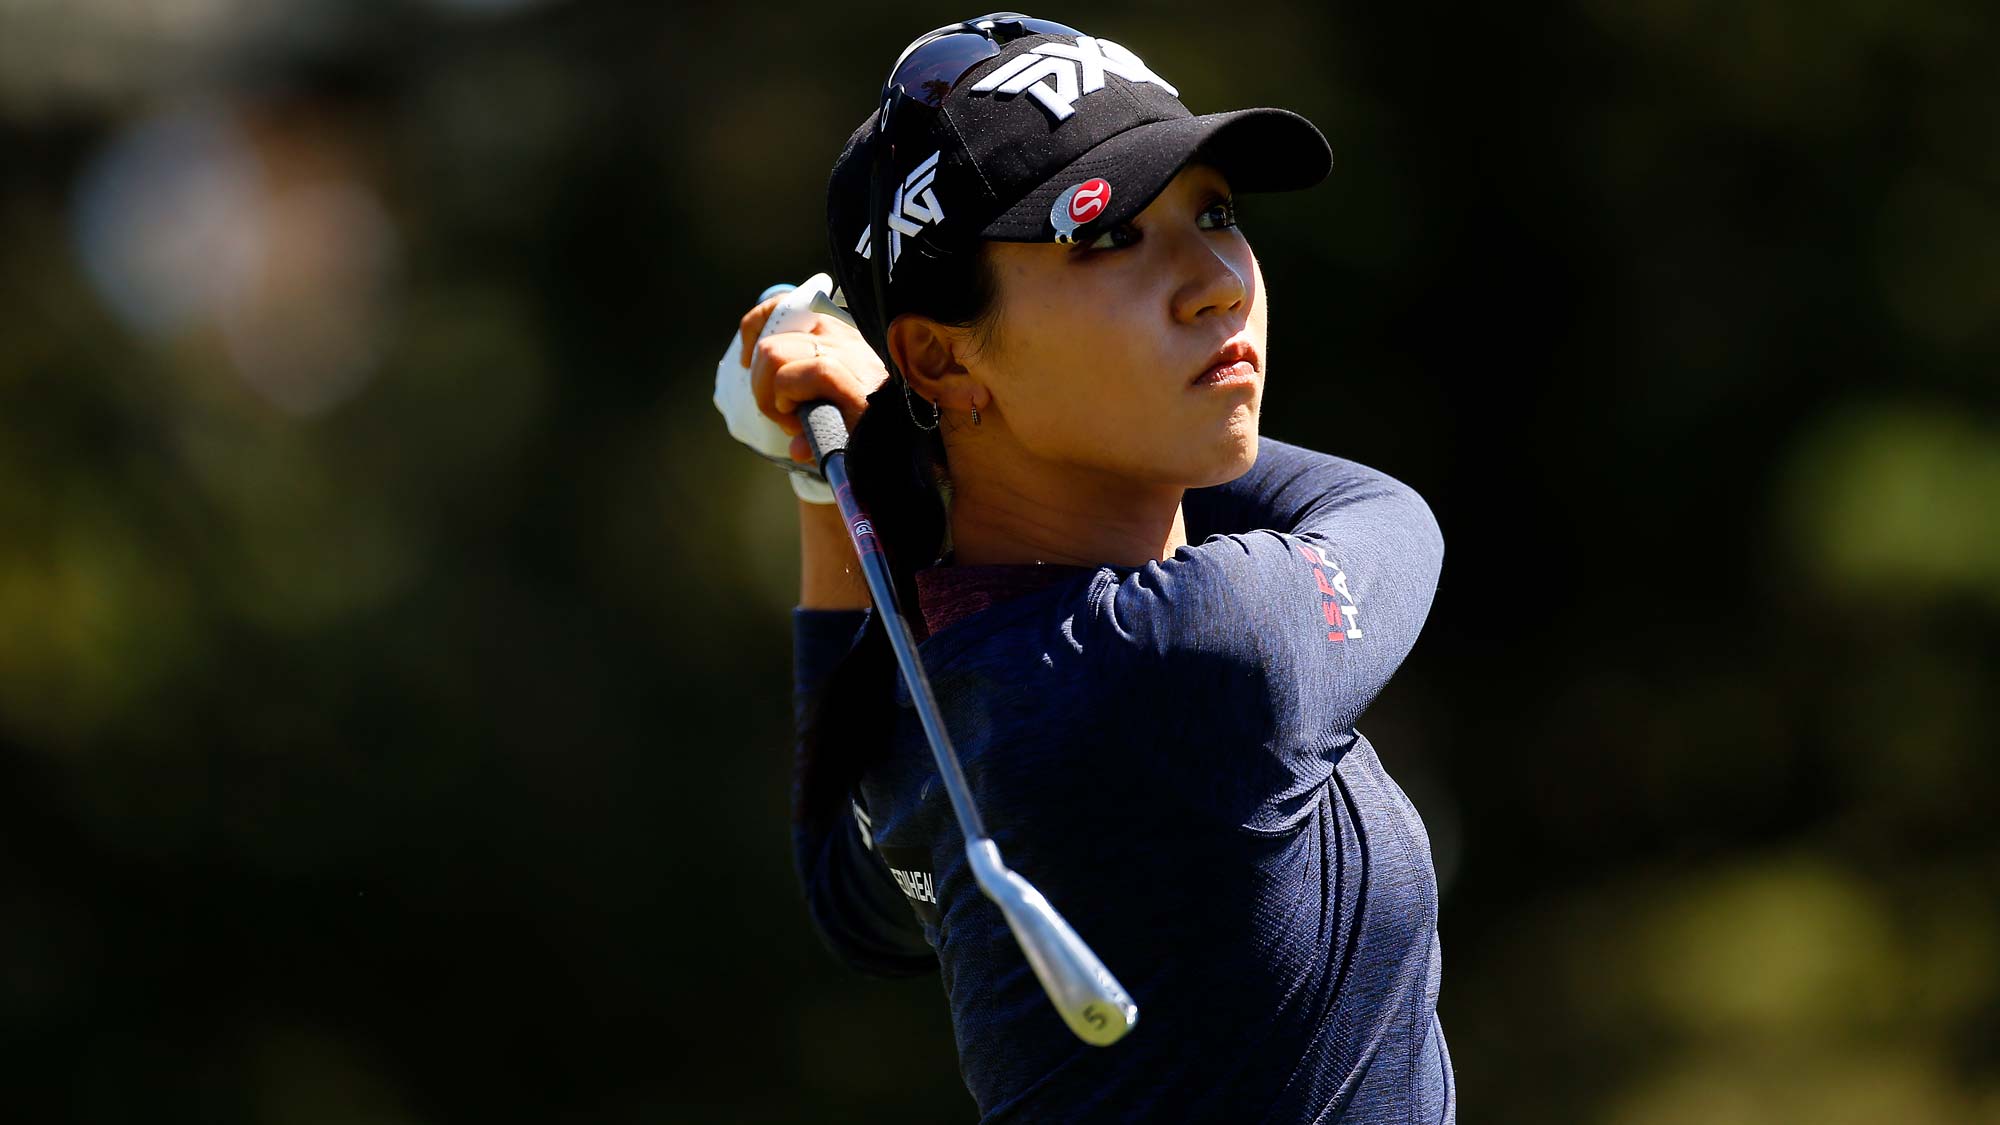 Lydia Ko of New Zealand hits on the sixth hole during the first round of the LPGA Mediheal Championship